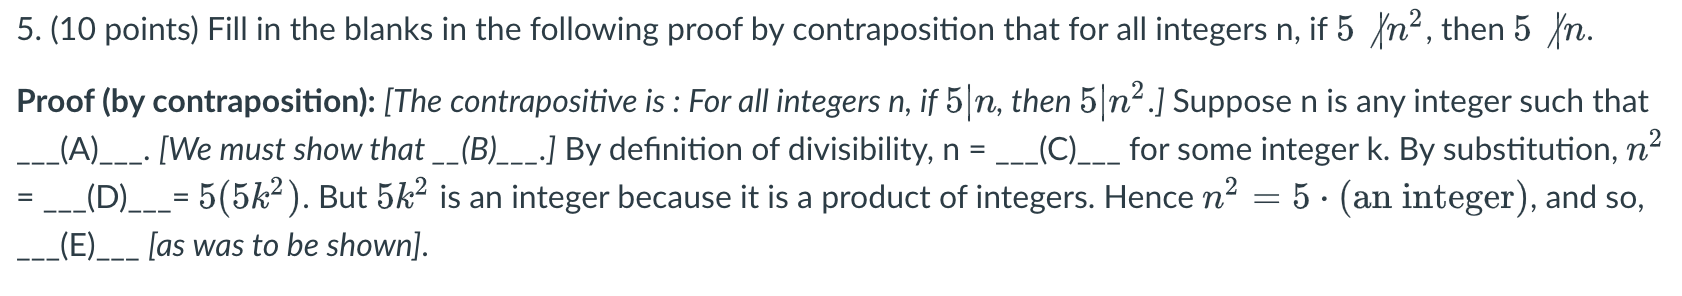 5. (10 points) Fill in the blanks in the following proof by contraposition that for all integers n, if 5 Xn,